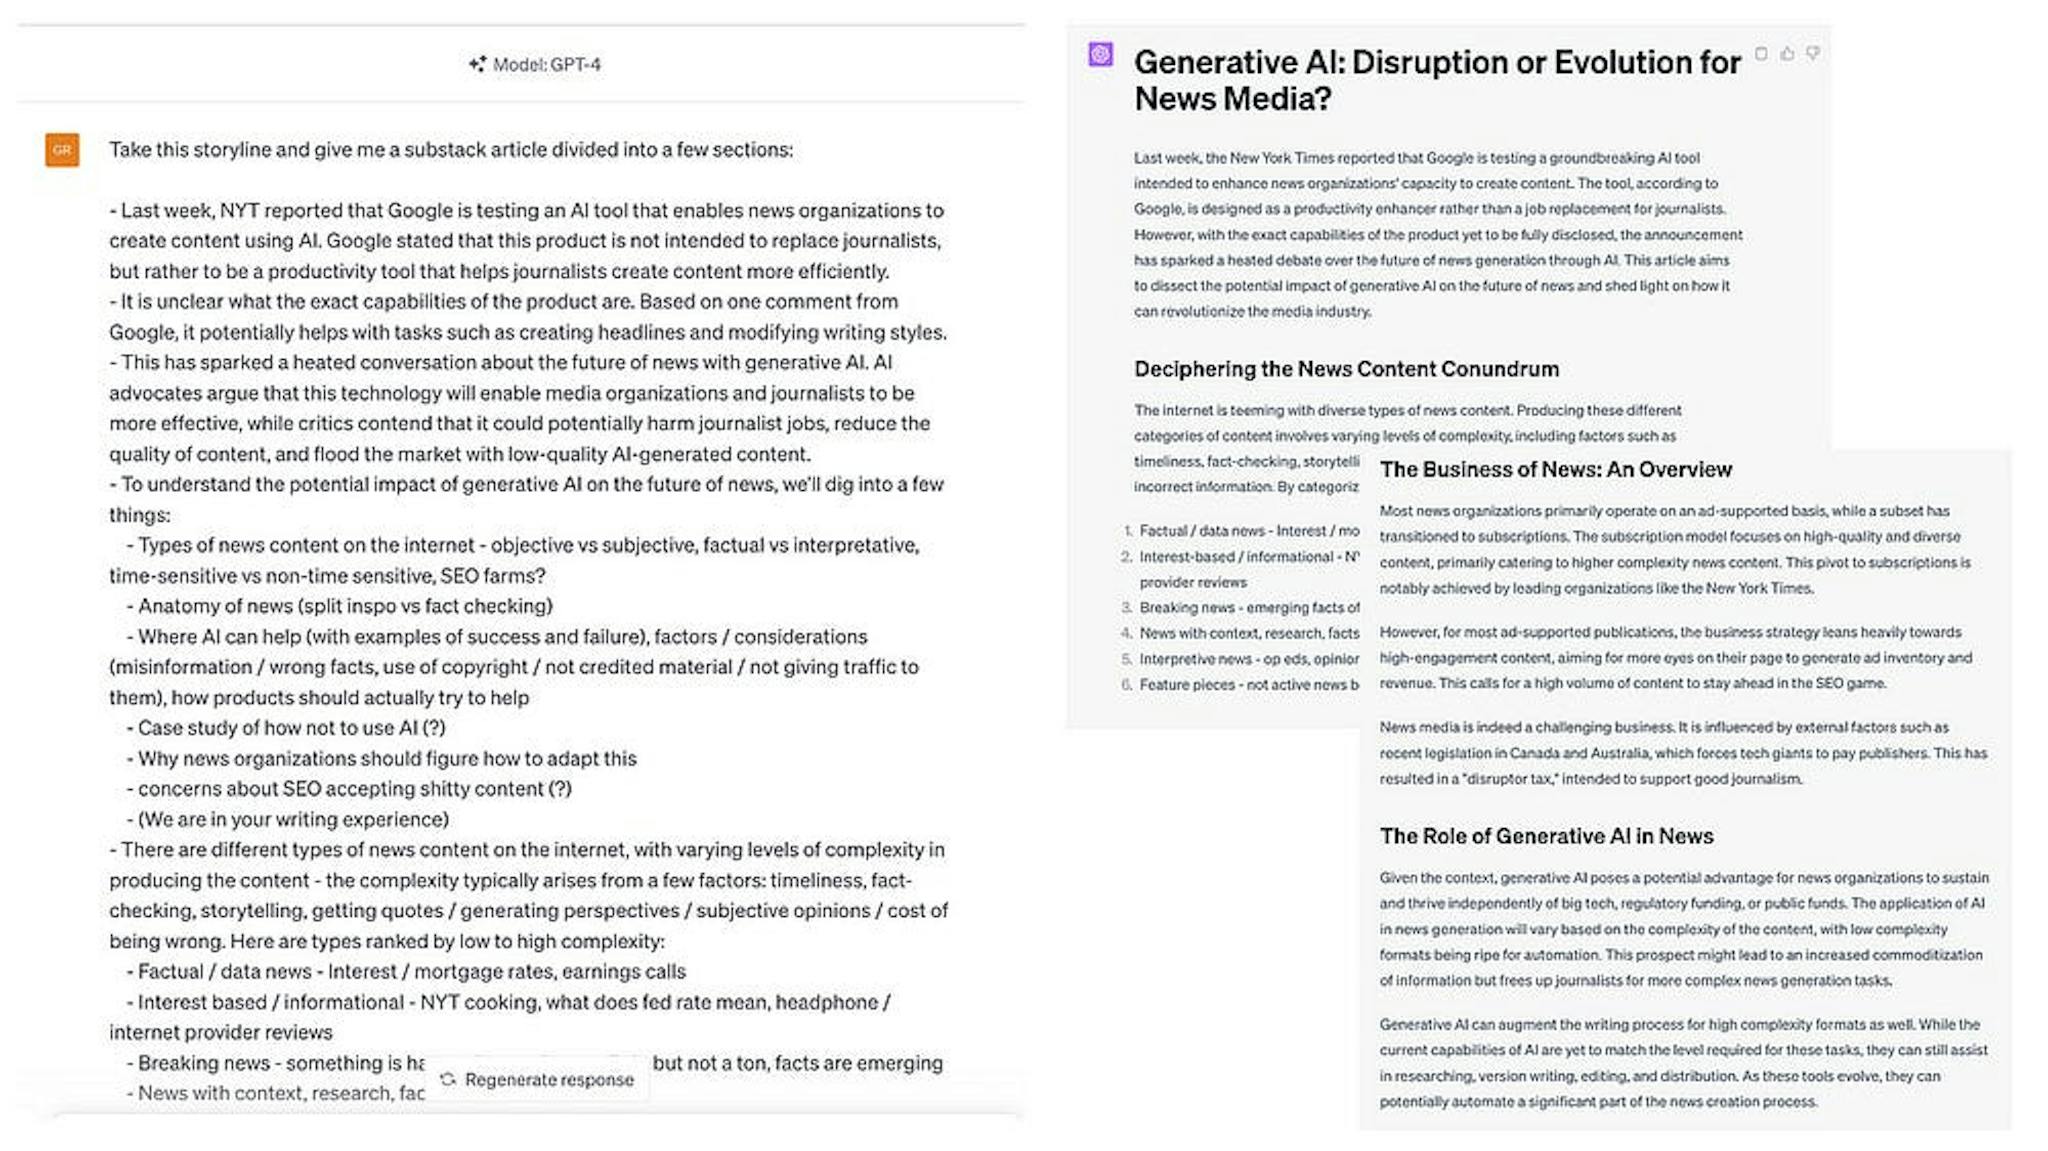 (left) detailed storyline fed to ChatGPT, (right) v1 draft of article; Source: created by author